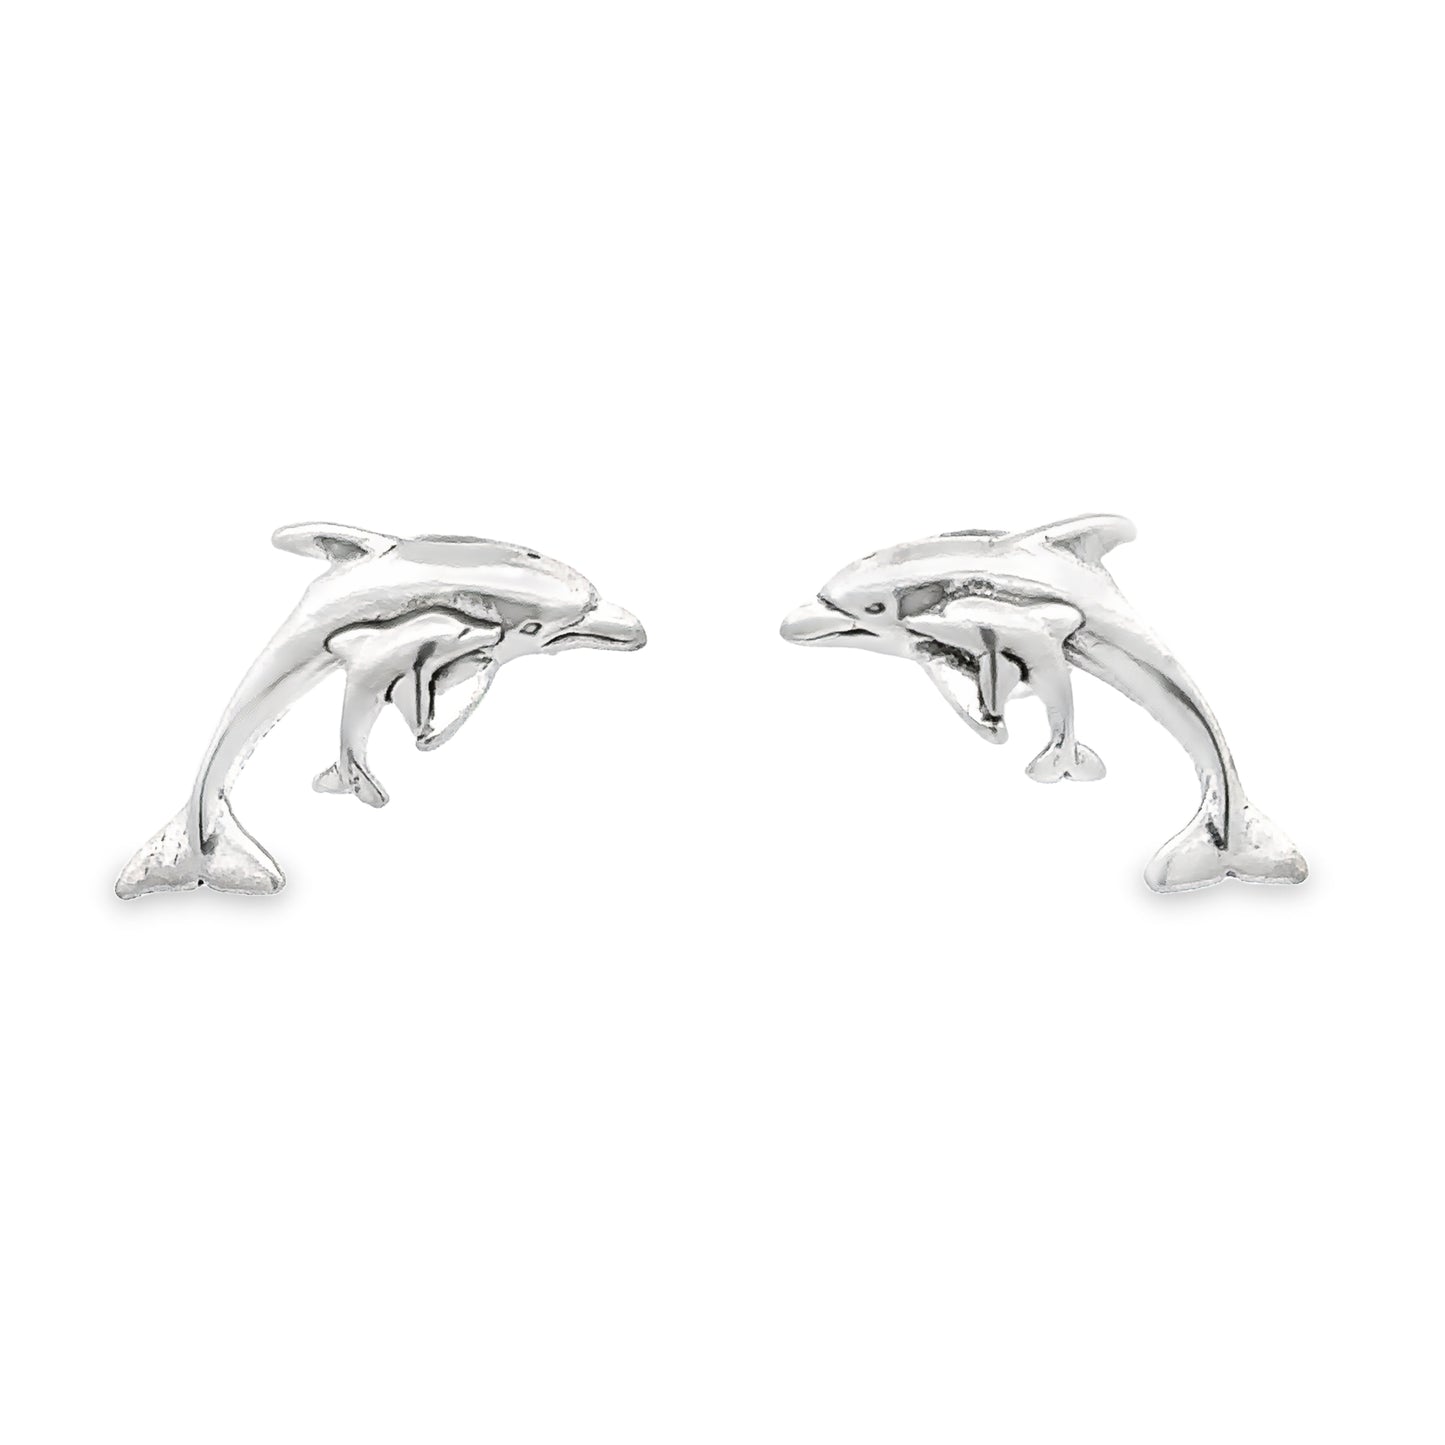 A pair of Dolphin and Calf Studs on a white background, showcasing the ocean's beauty.